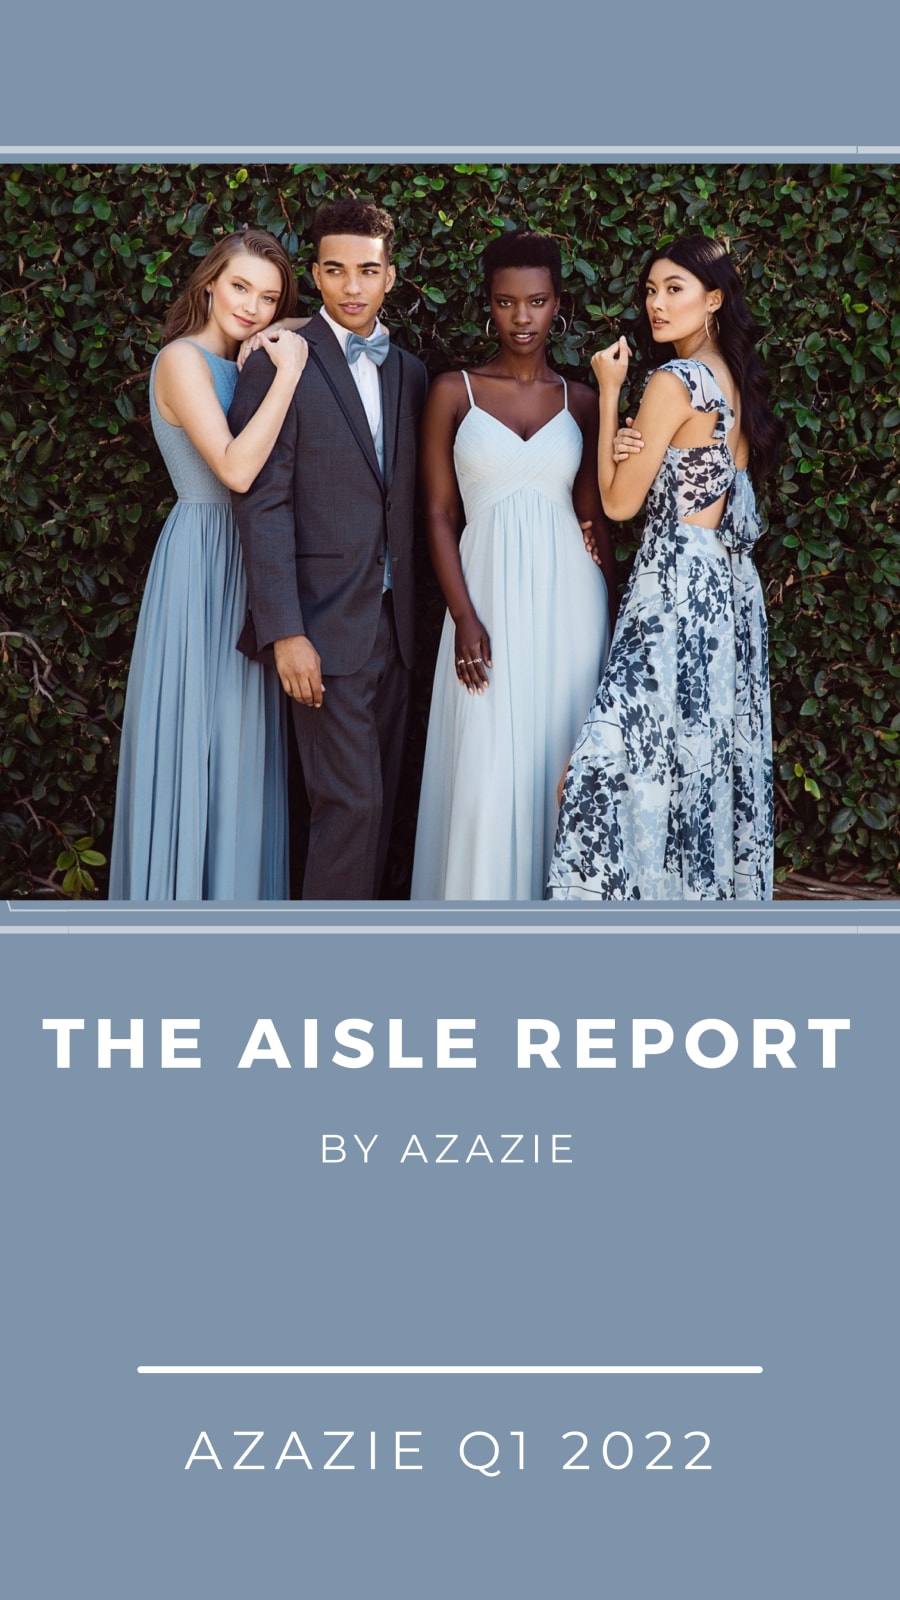 The Aisle Report